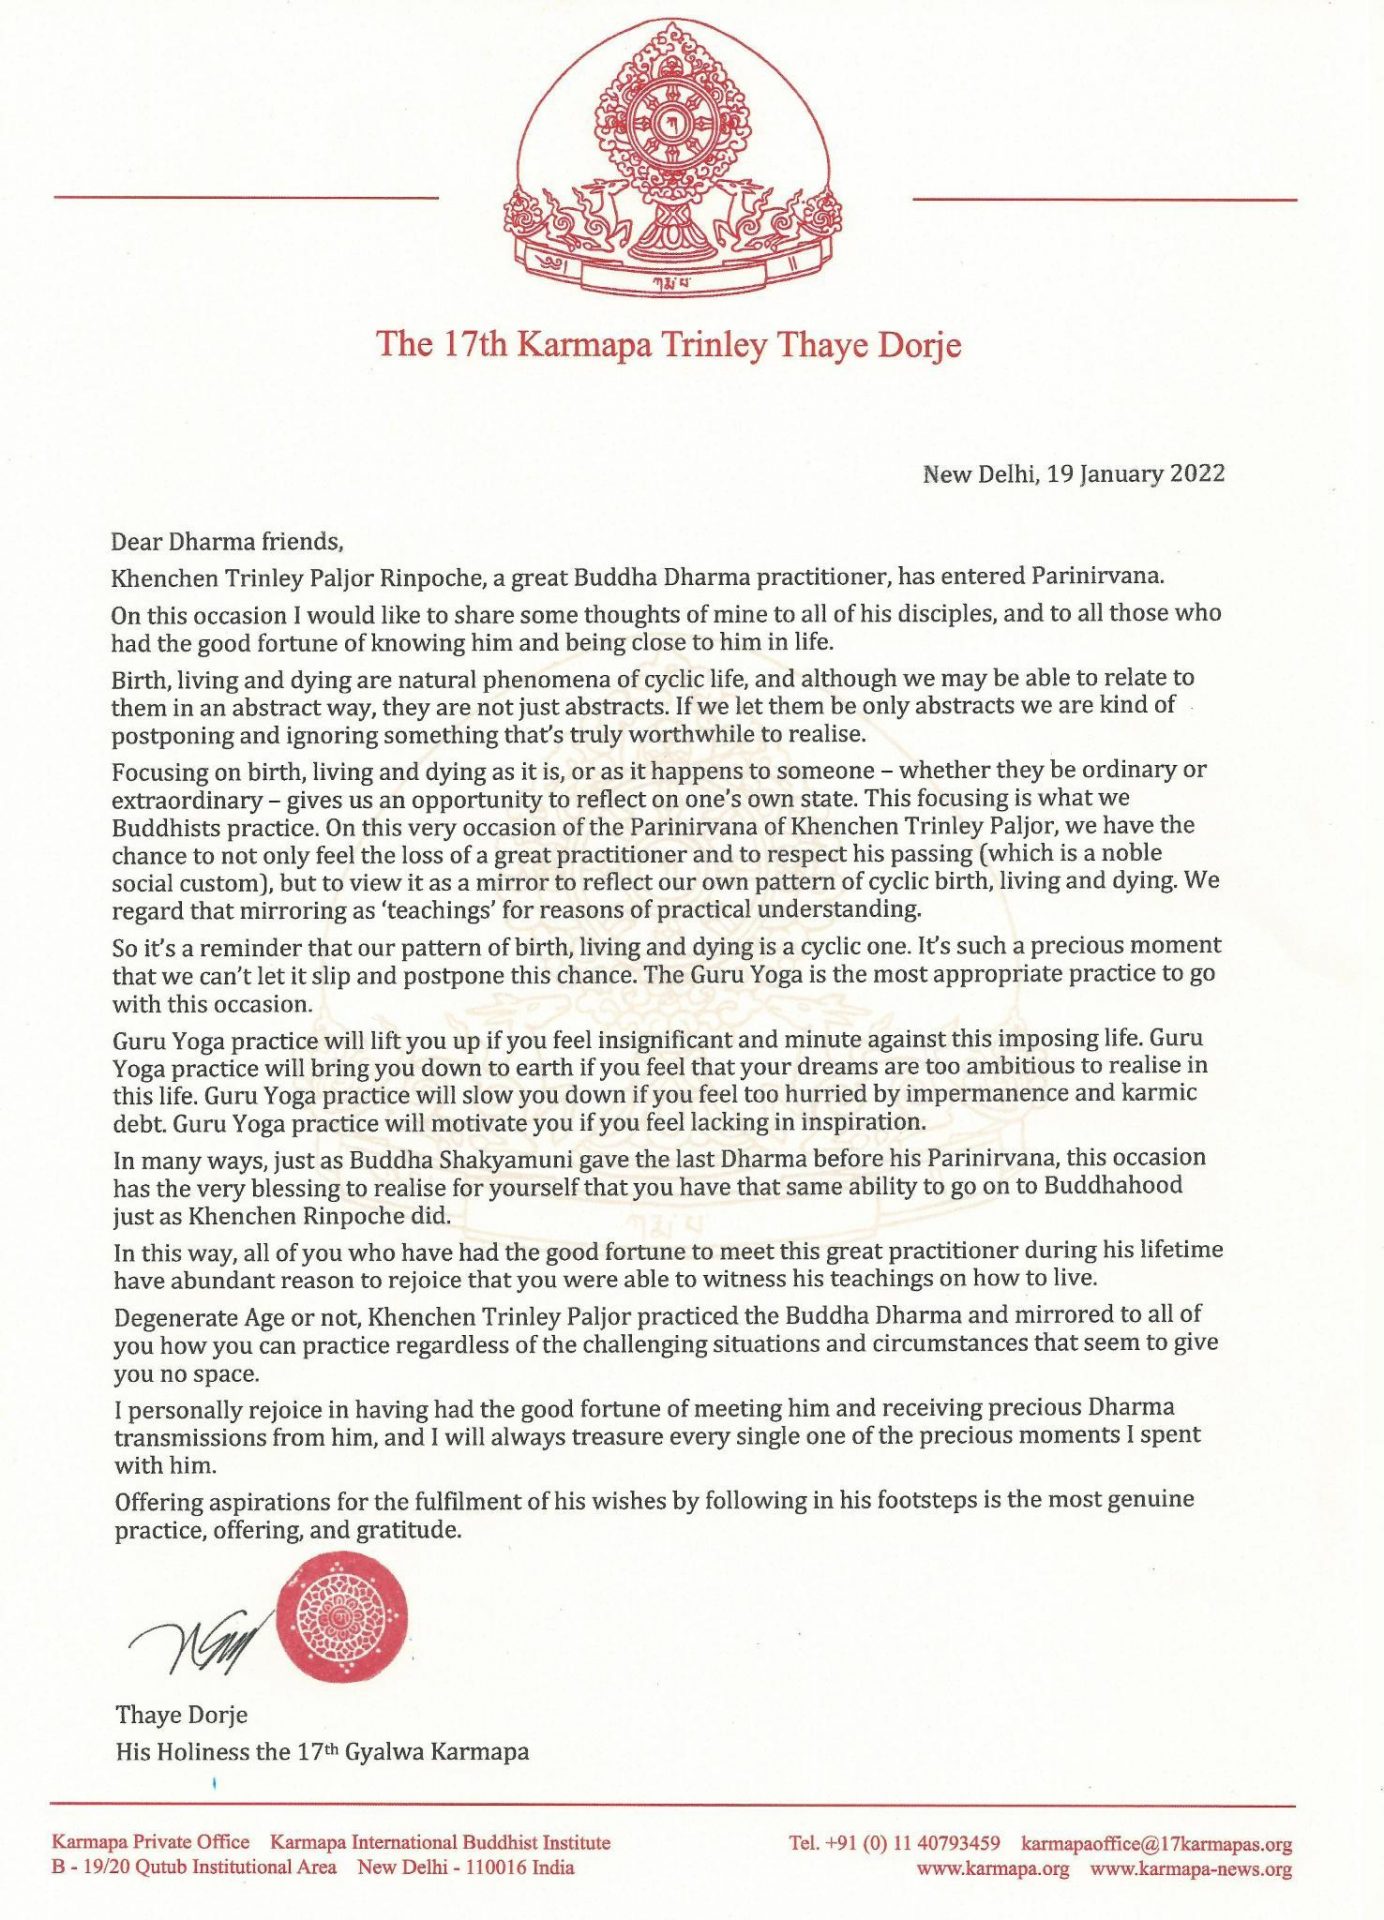 Letter on the passing of Khenchen Trinley Paljor Rinpoche, from Thaye Dorje, His Holiness the 17th Gyalwa Karmapa